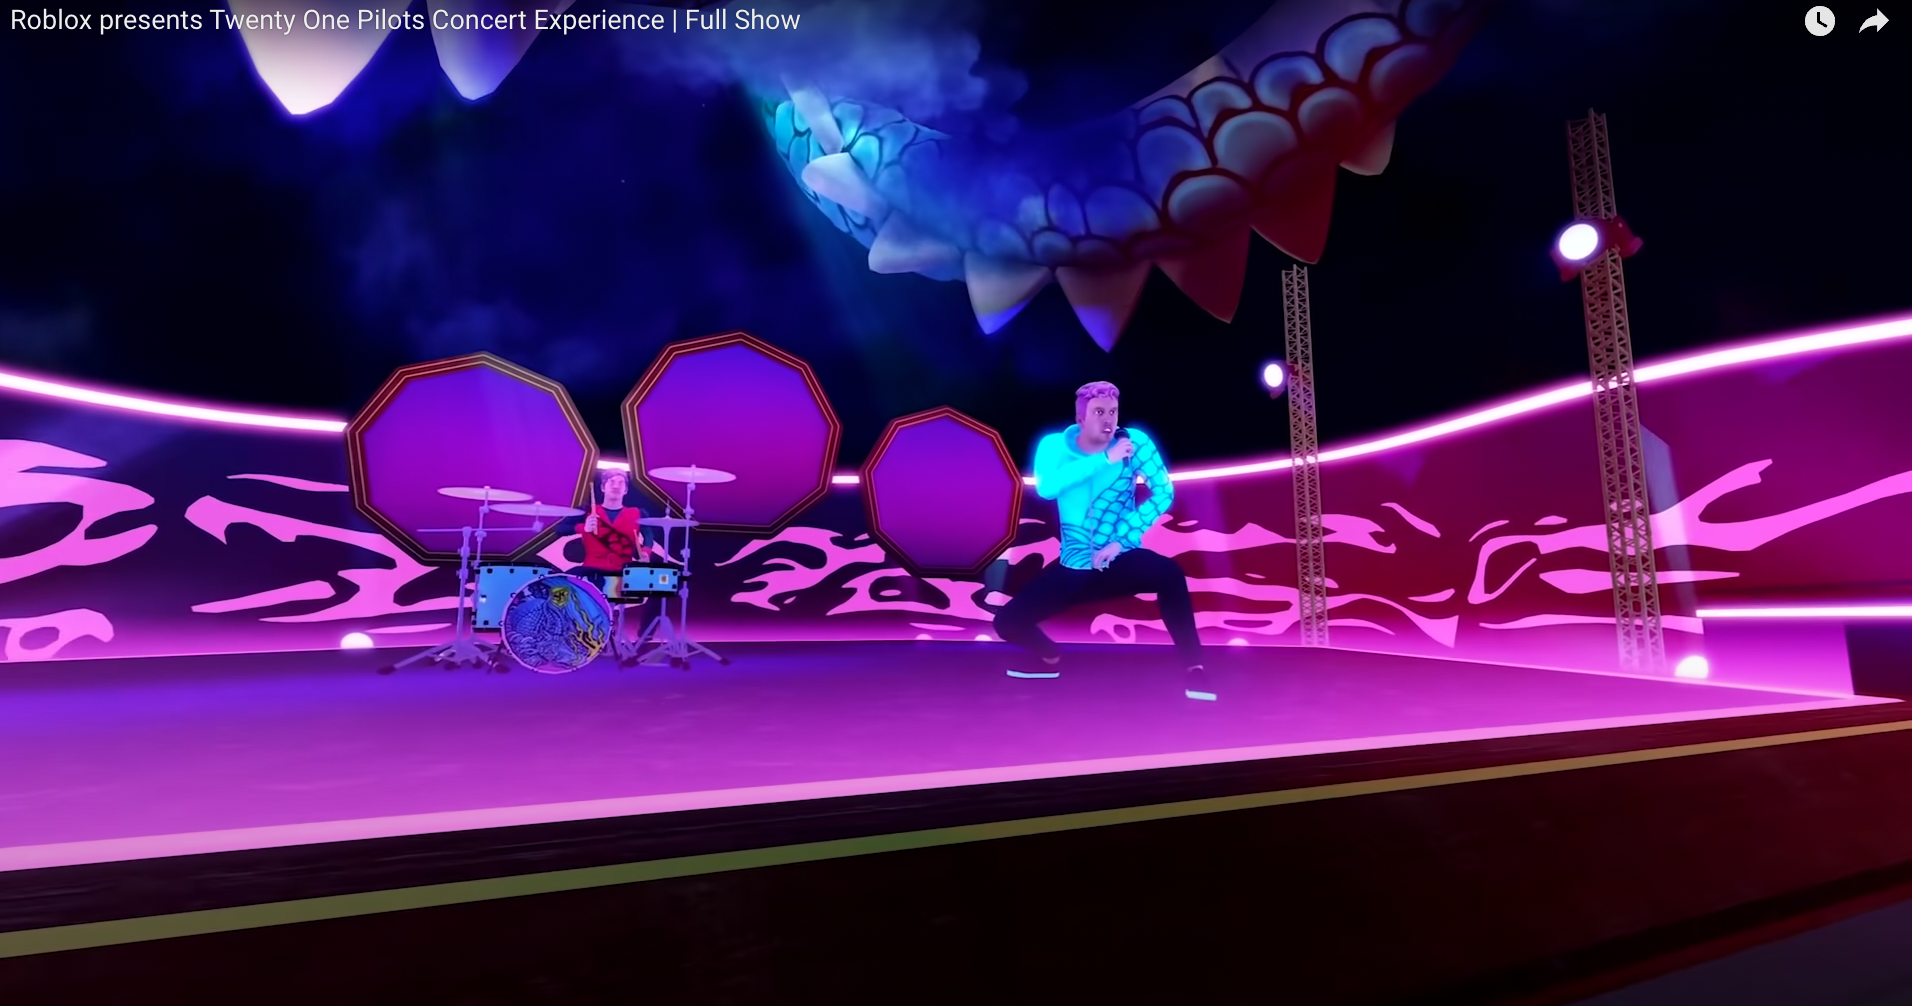 American band Twenty-One Pilots staged a full virtual concert on Roblox.